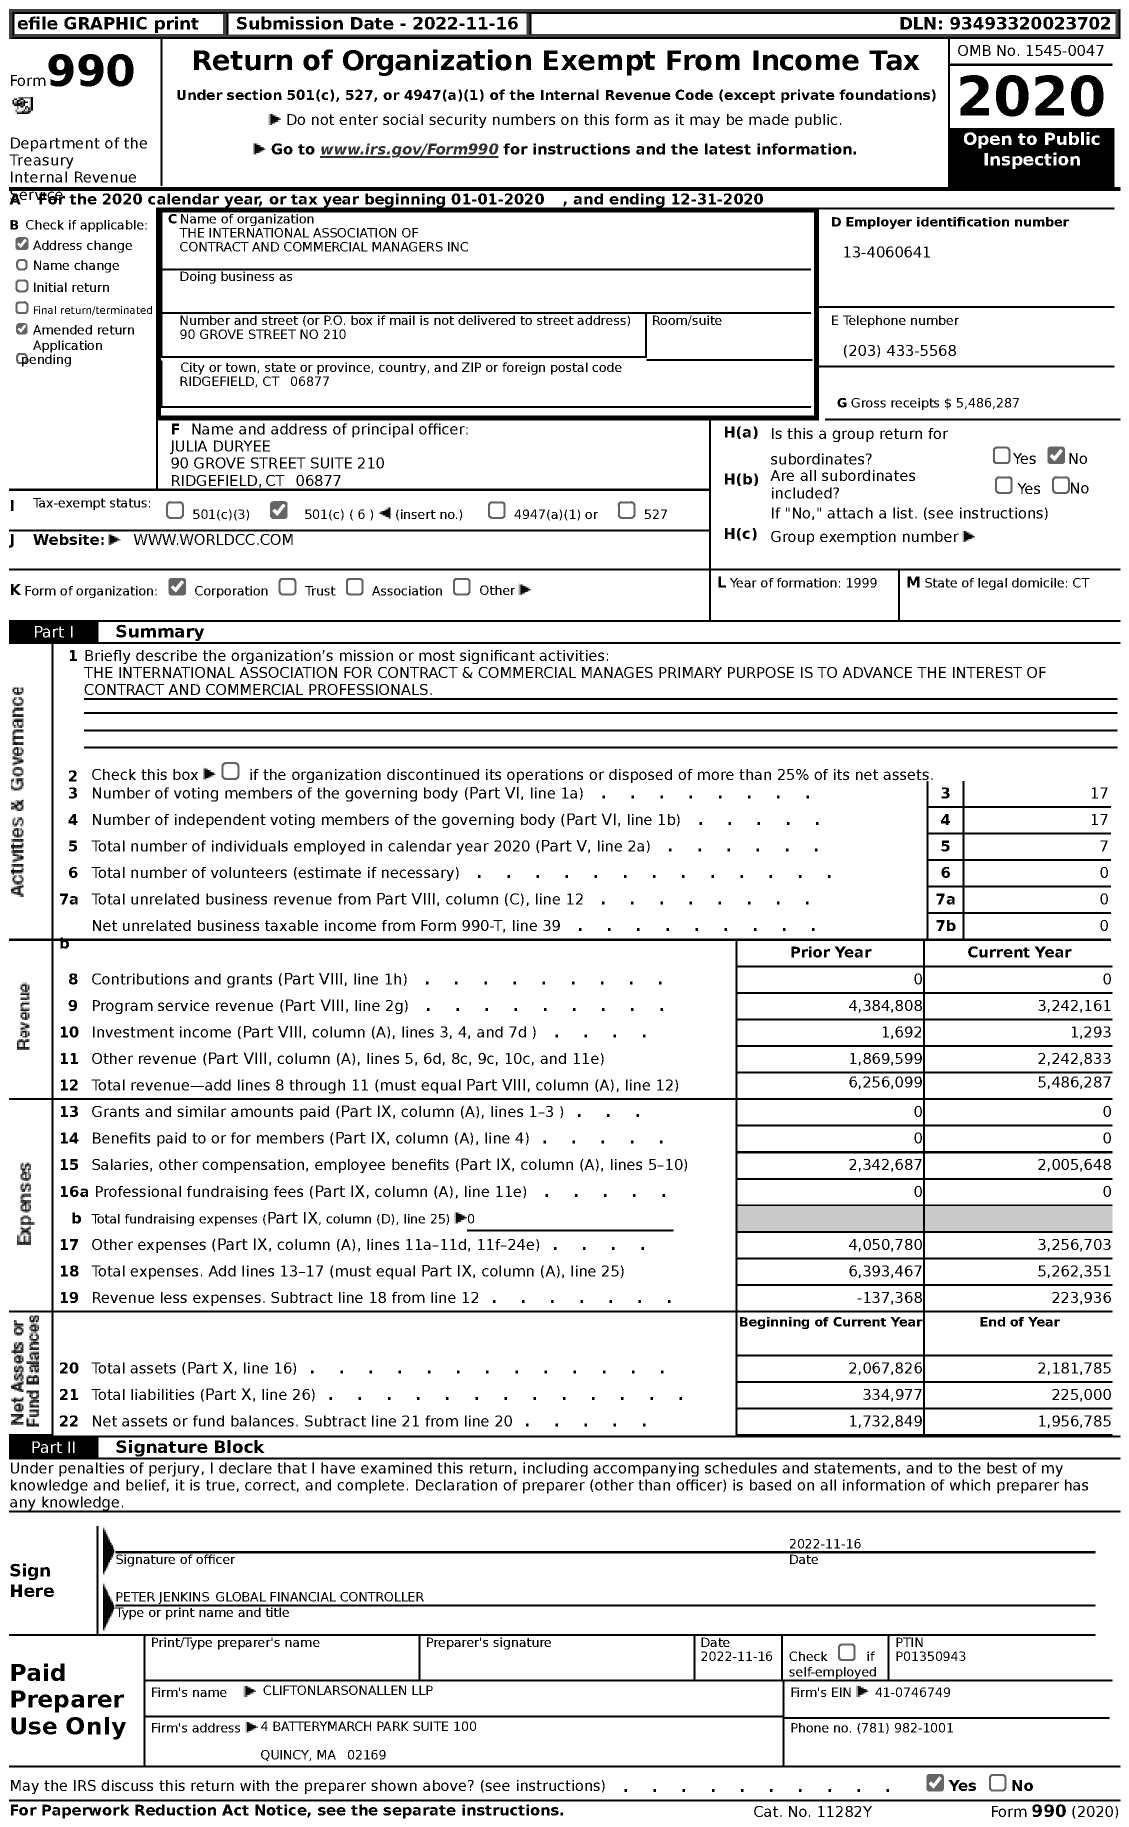 Image of first page of 2020 Form 990 for The International Association of Contract and Commercial Managers (IACCM)